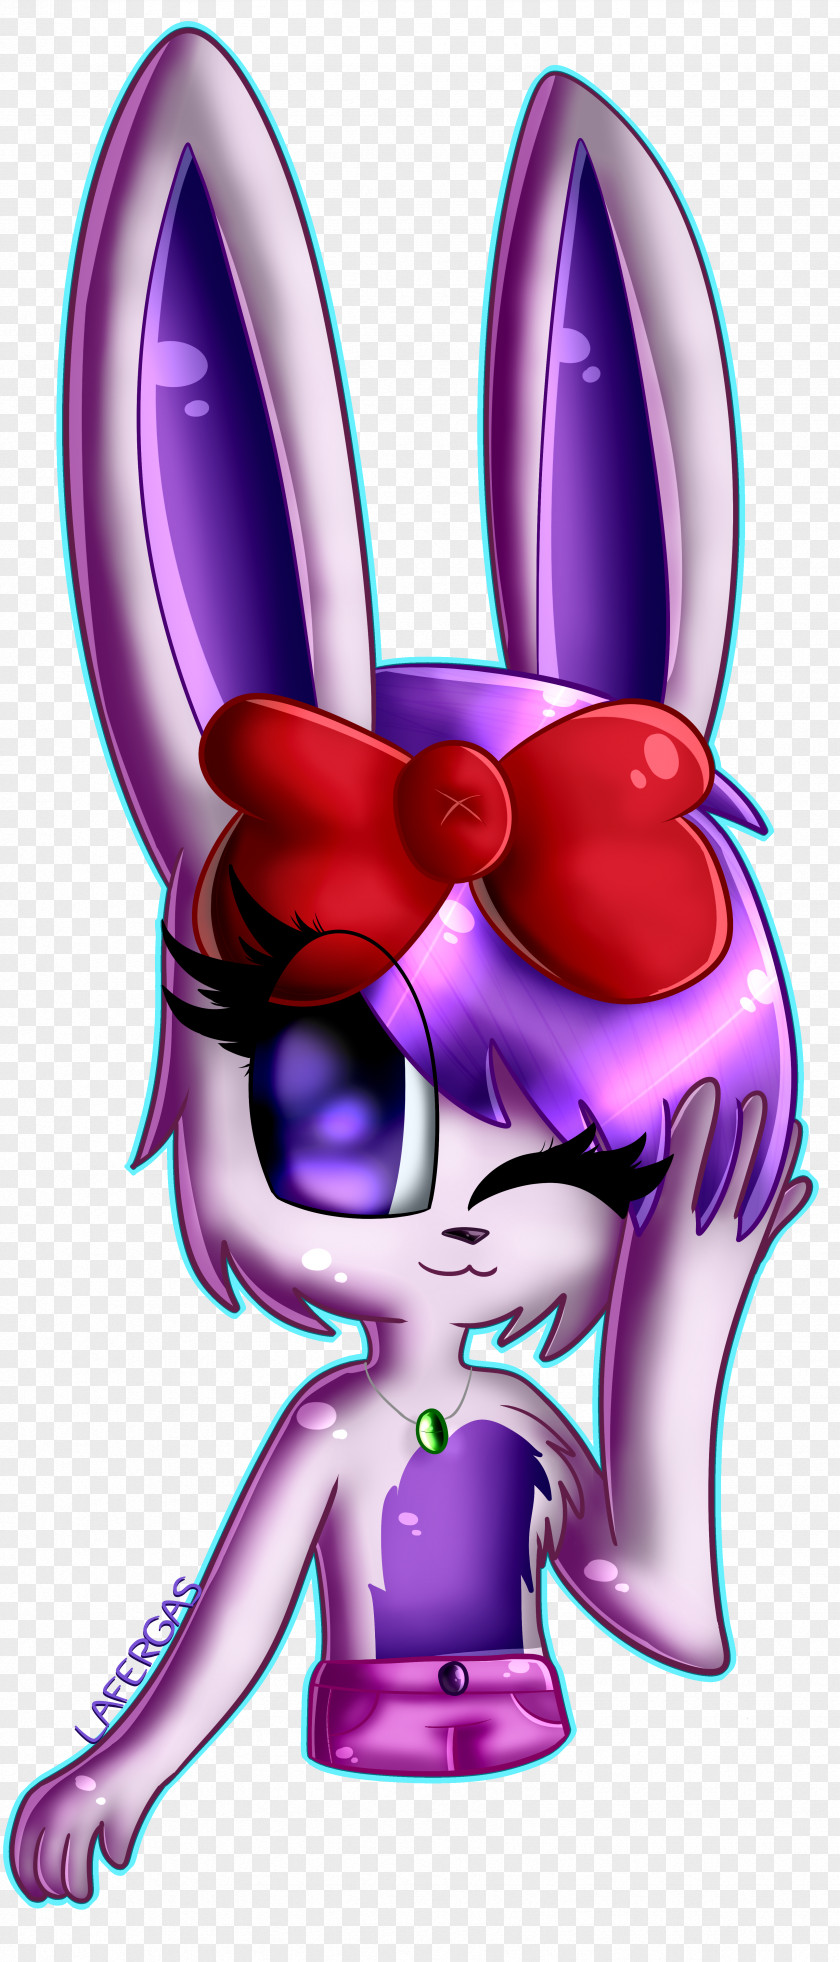 Rabbit Five Nights At Freddy's Easter Bunny DeviantArt PNG